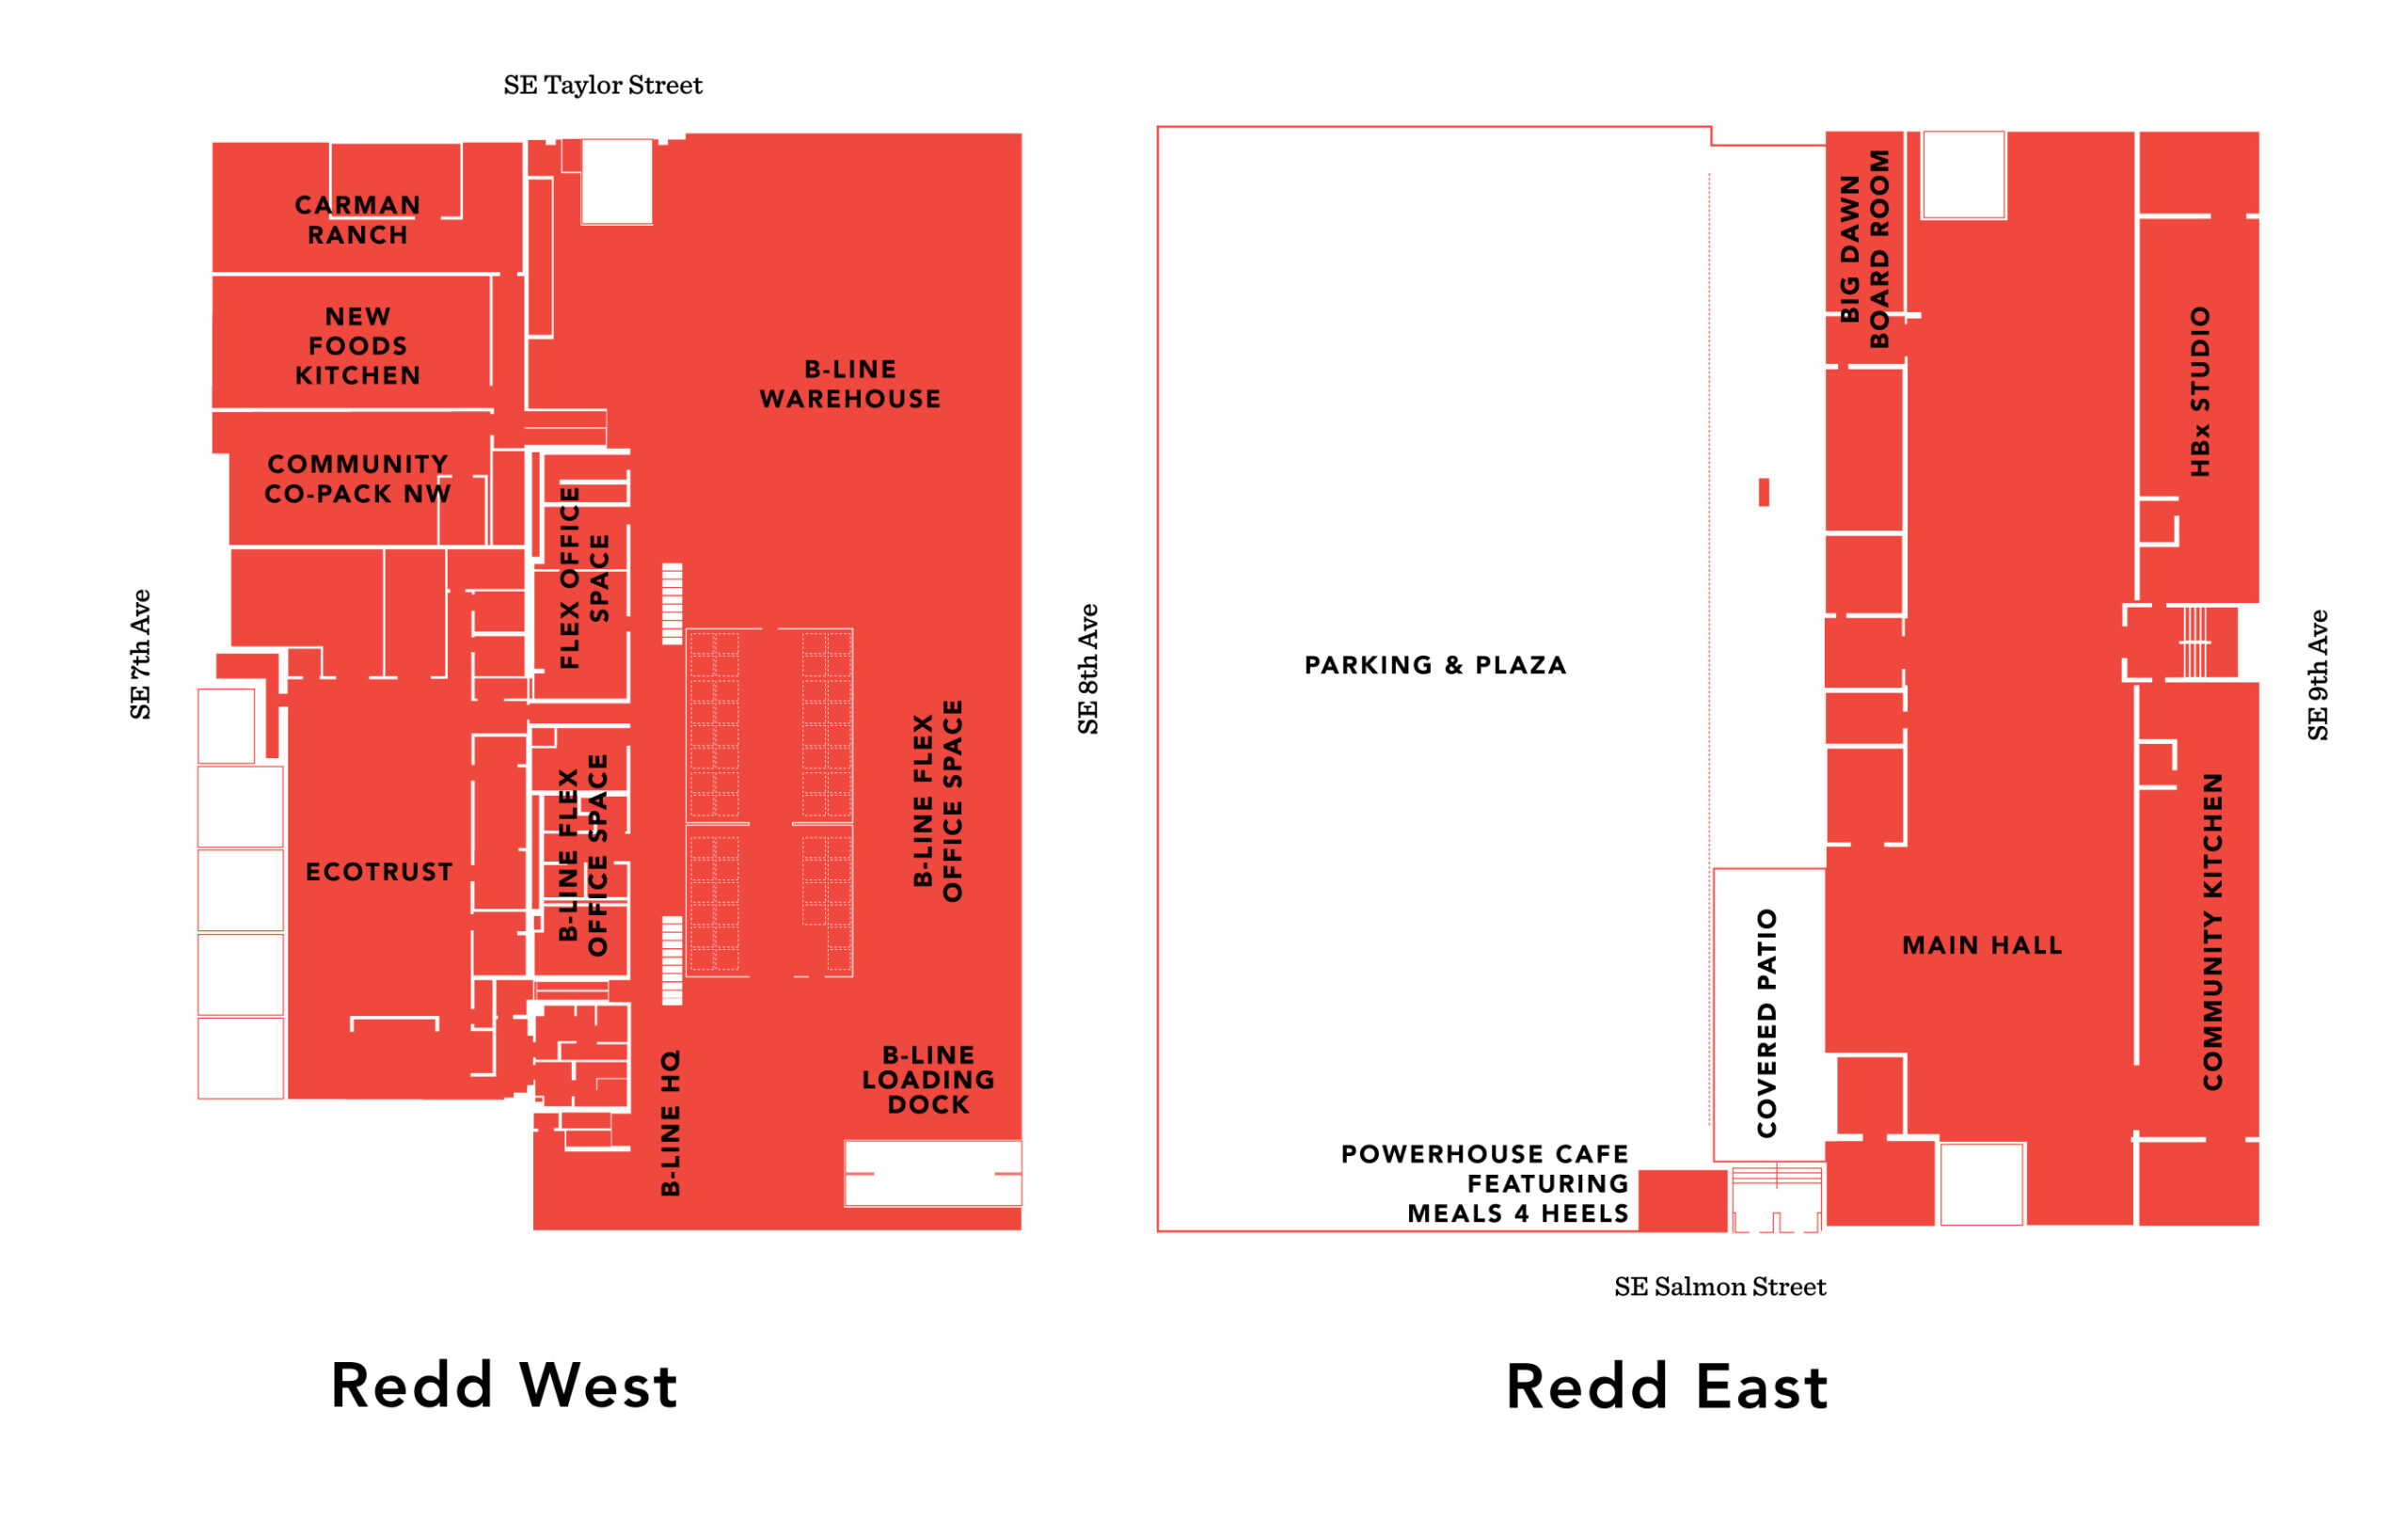 A graphic showing the floor plan of the Redd campus, with each space labeled.